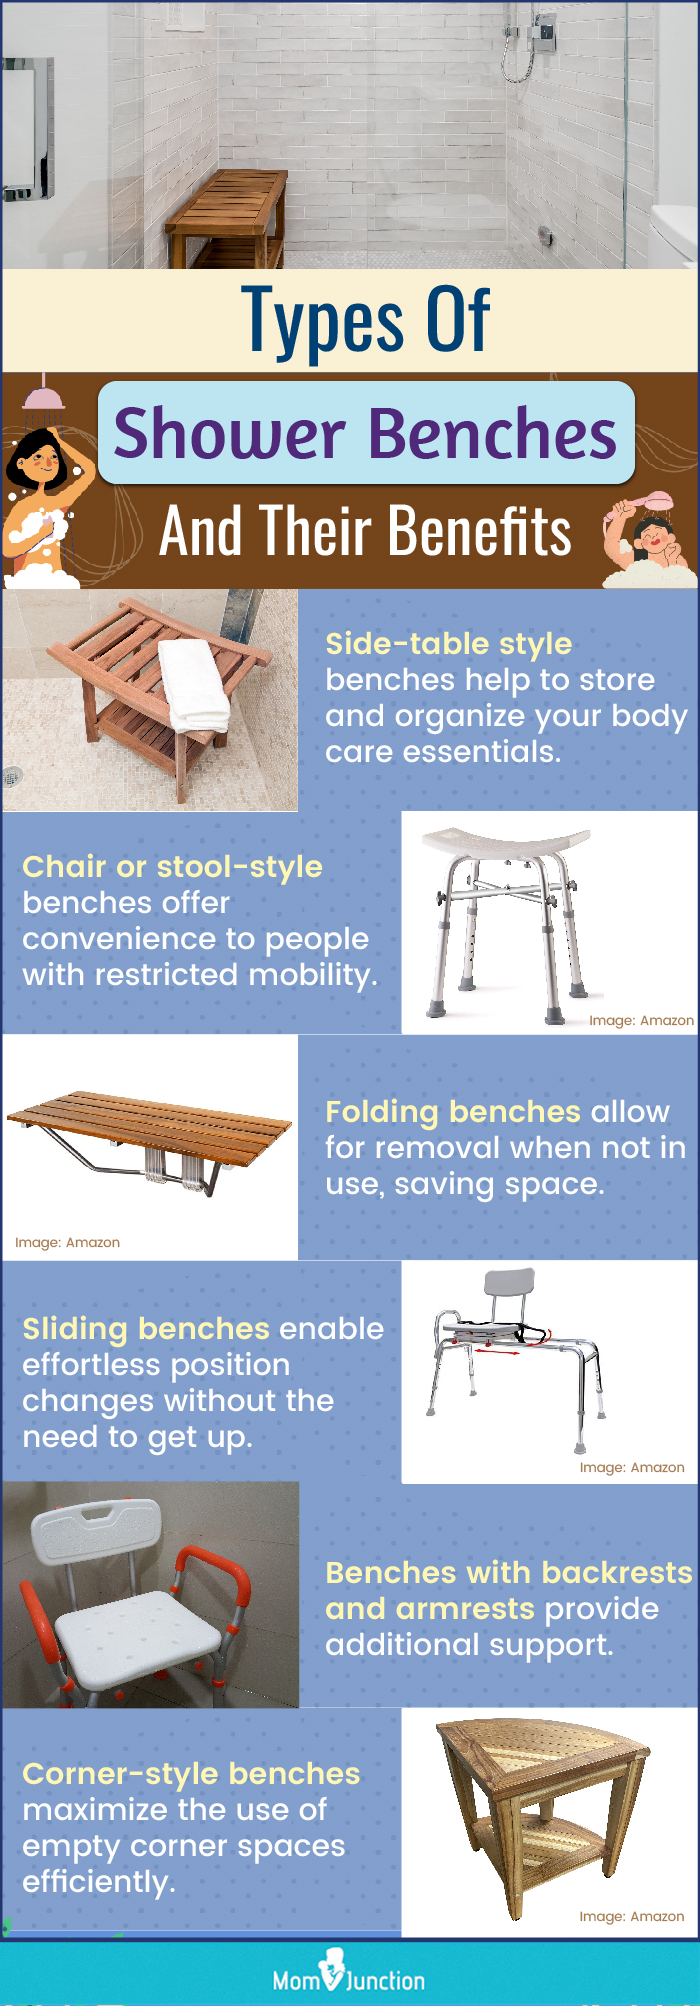  Types Of Shower Benches And Their Benefits (infographic)